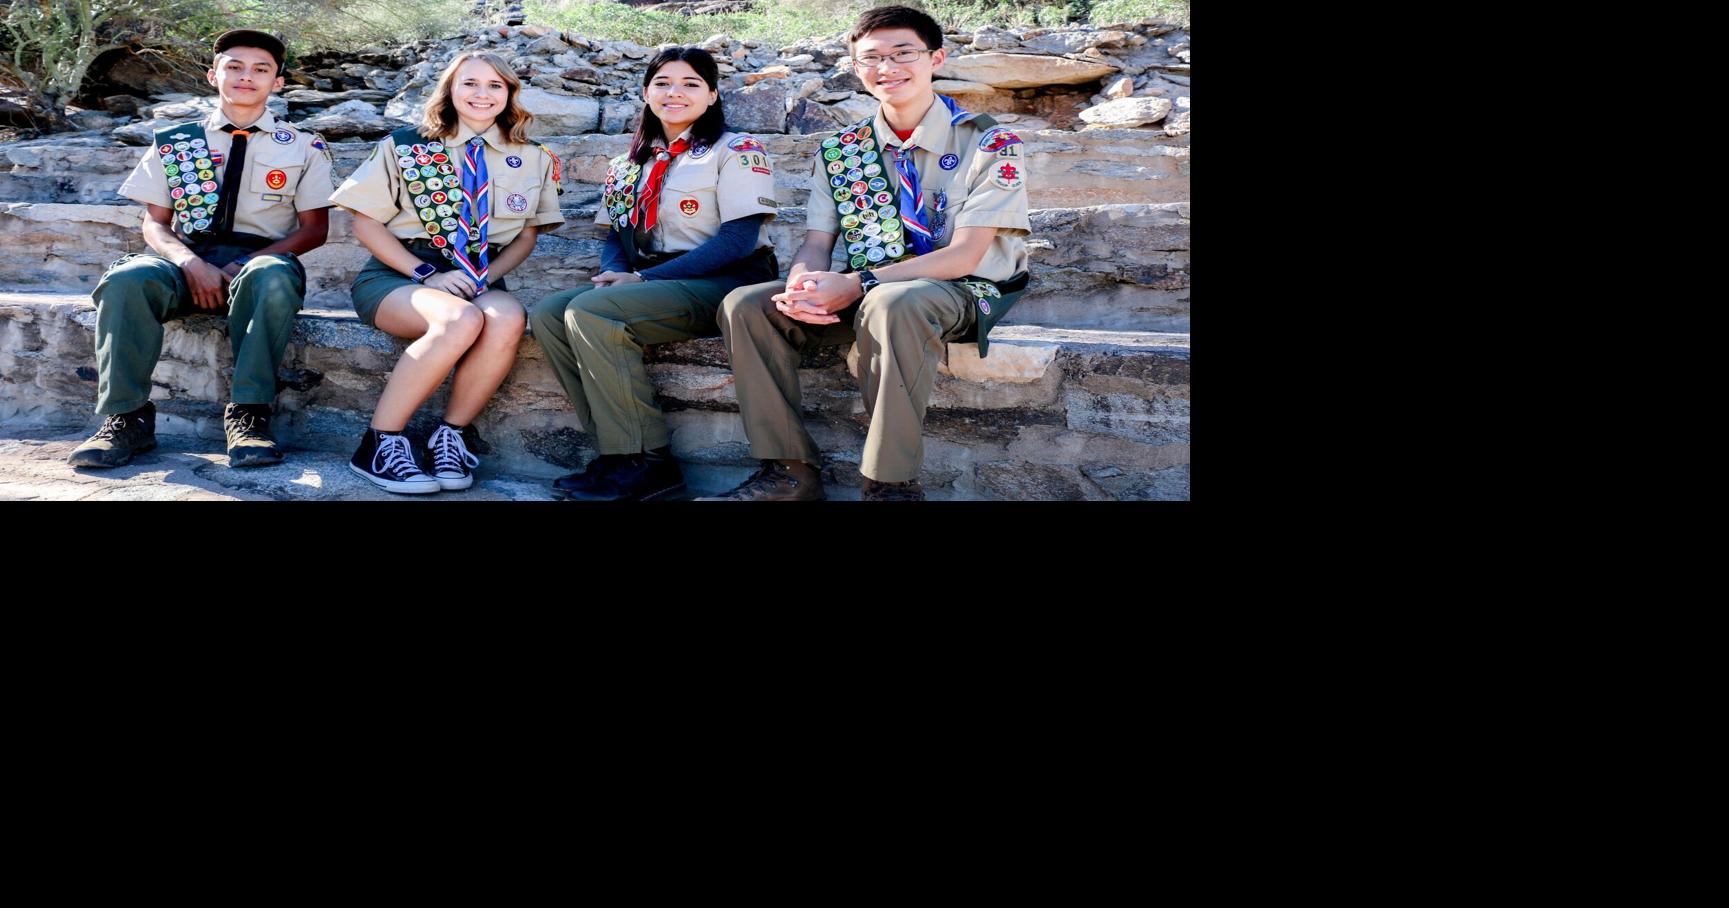 Two from Flagstaff named in Grand Canyon Council's 2022 Scouts of the Year